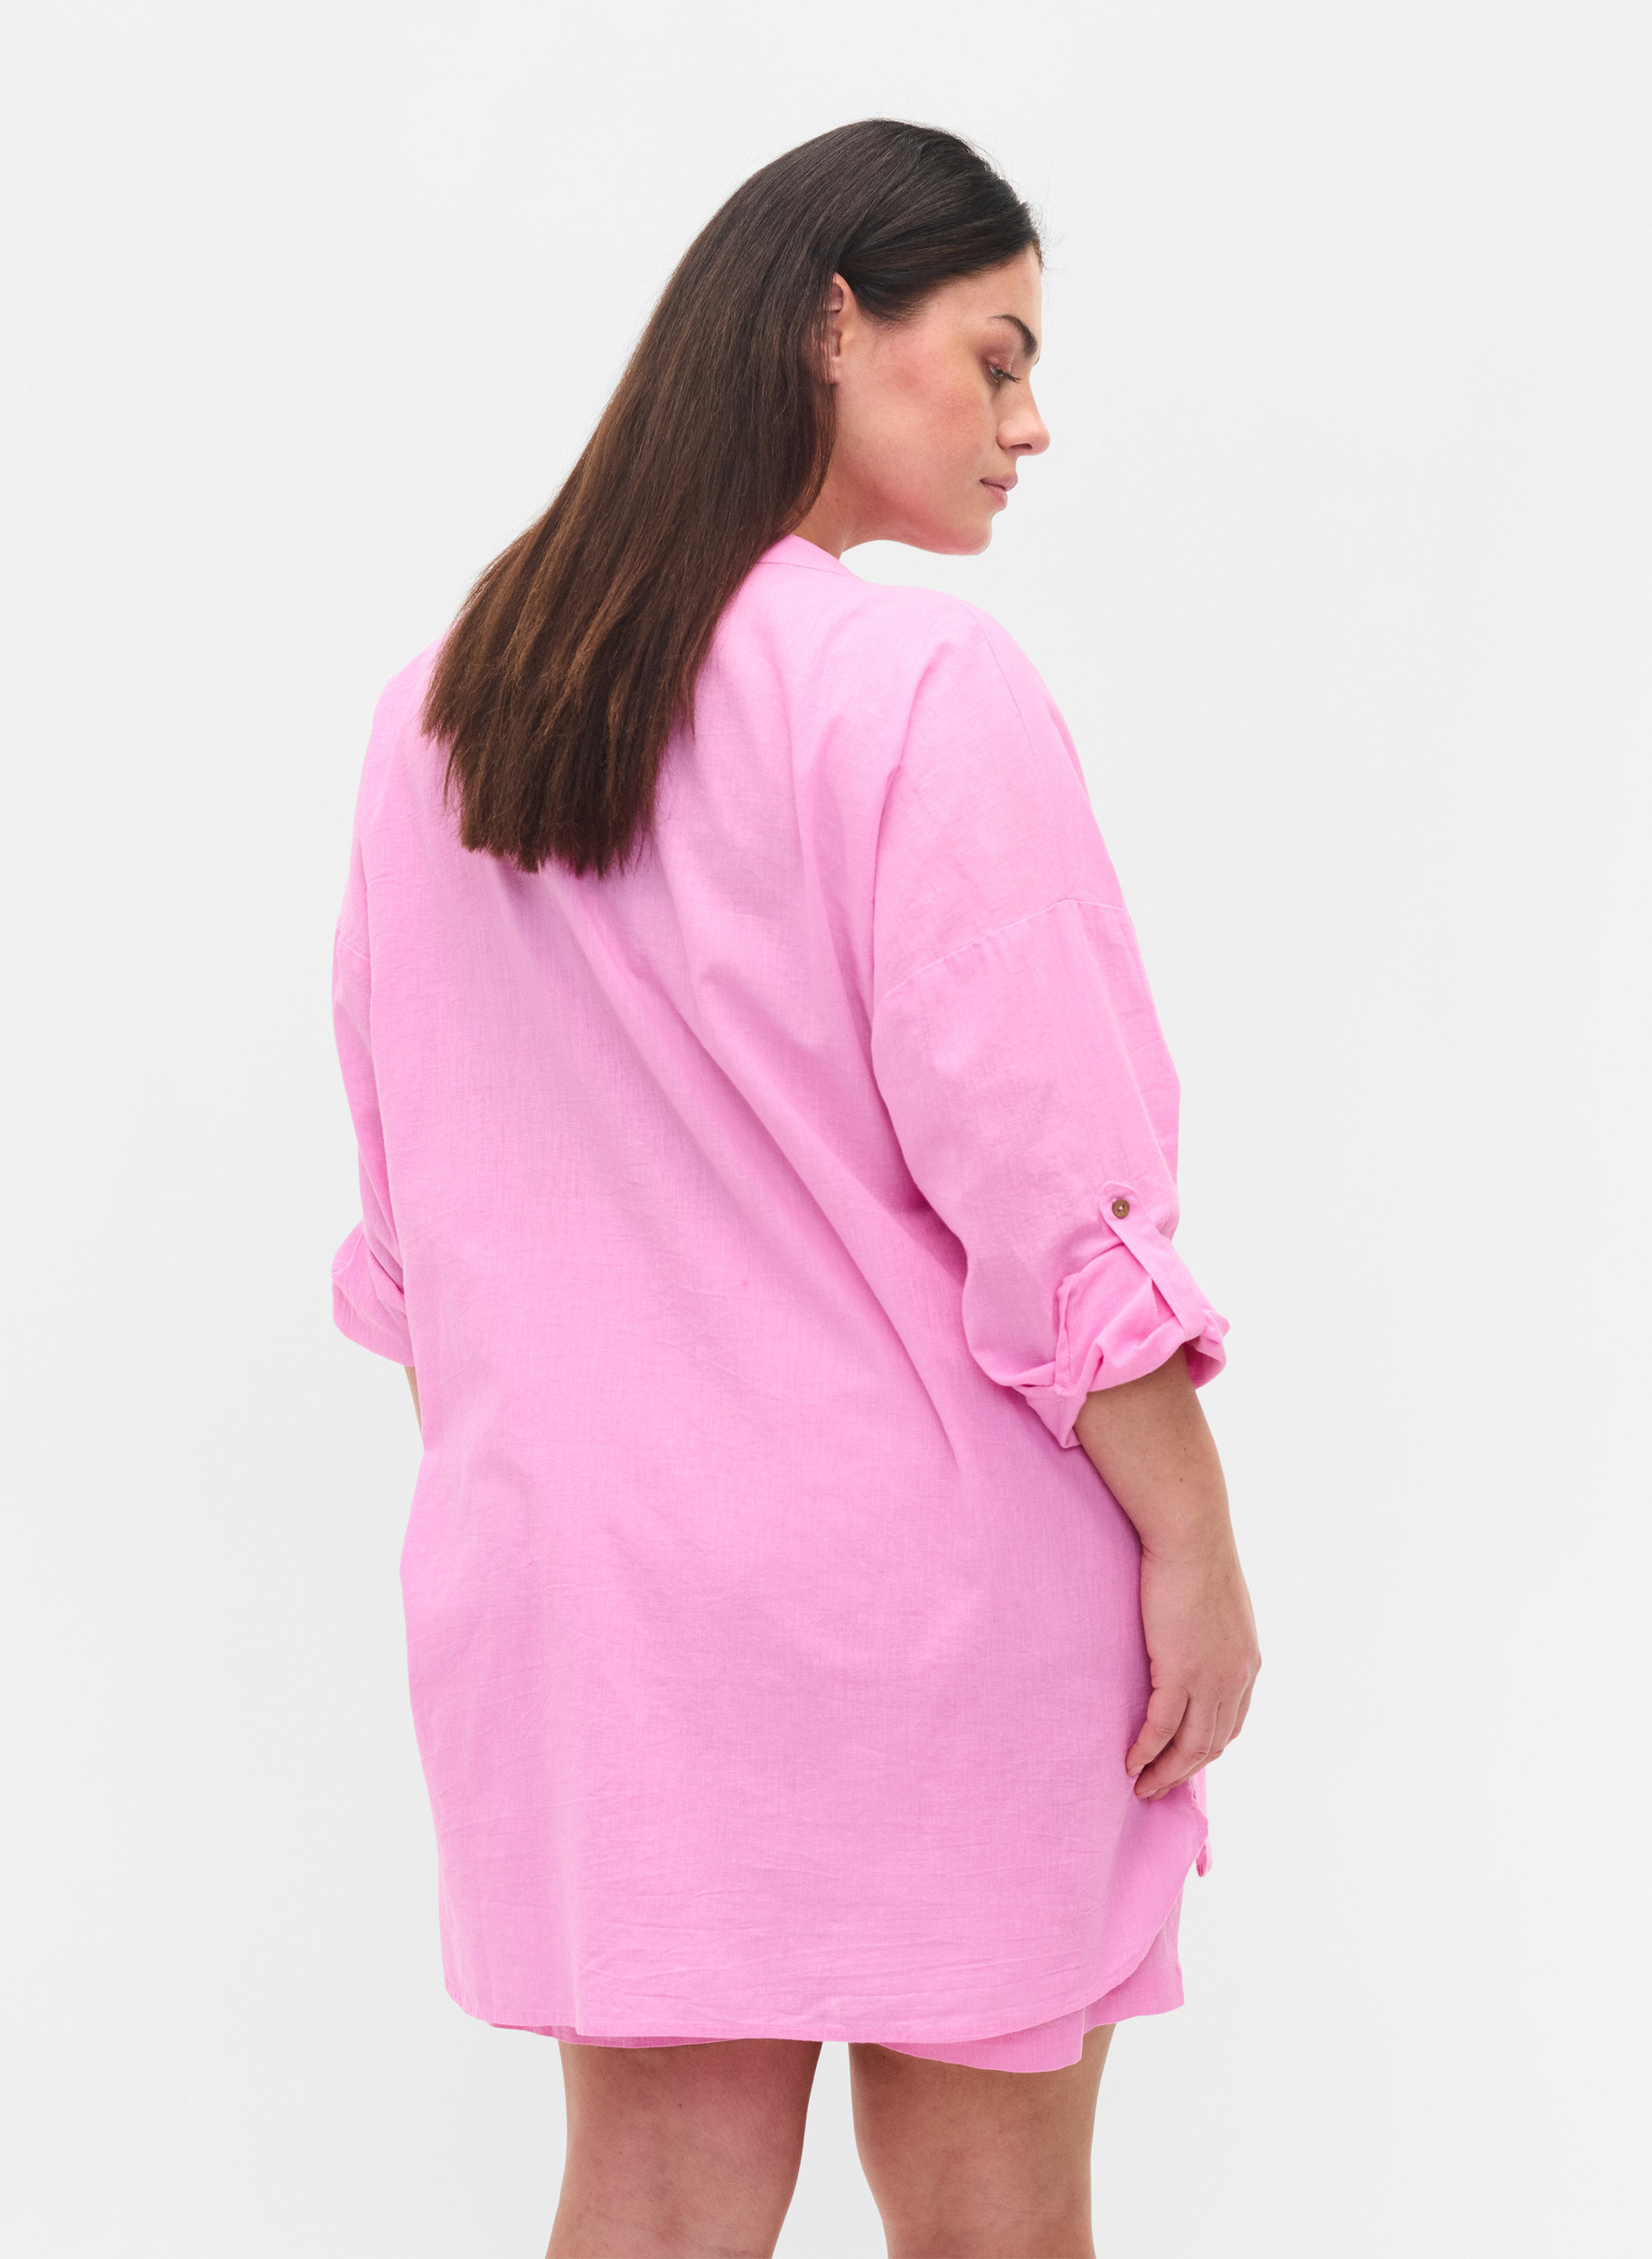 Blouse with 3/4-length sleeves and button closure, Begonia Pink, Model